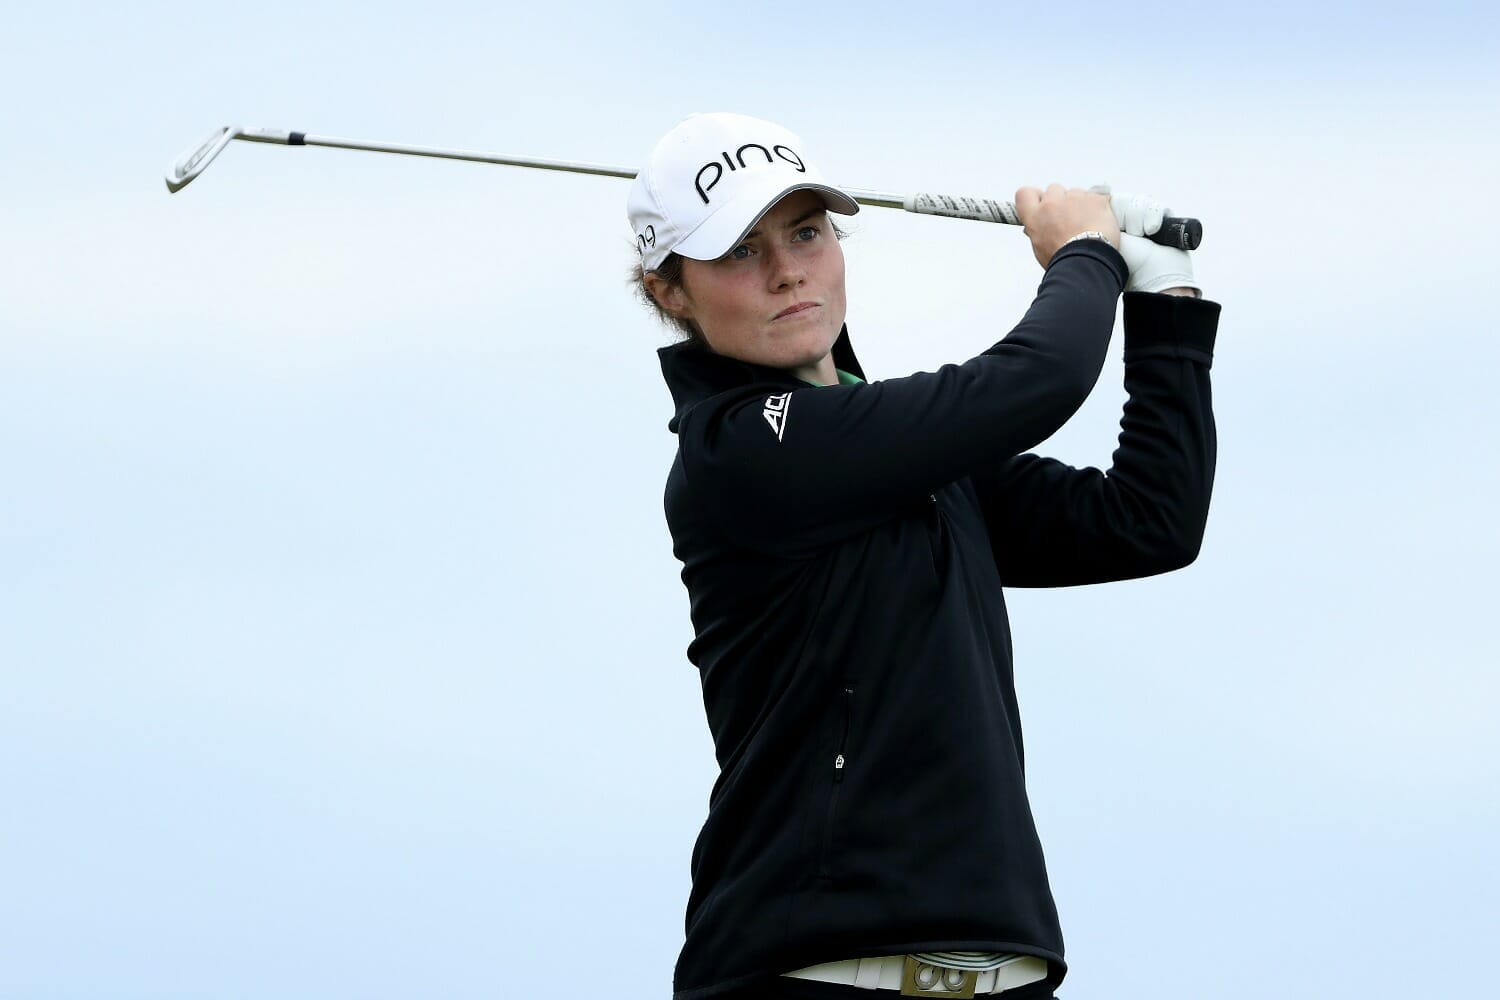 Job done for Leona Maguire with ninth place at Q-School